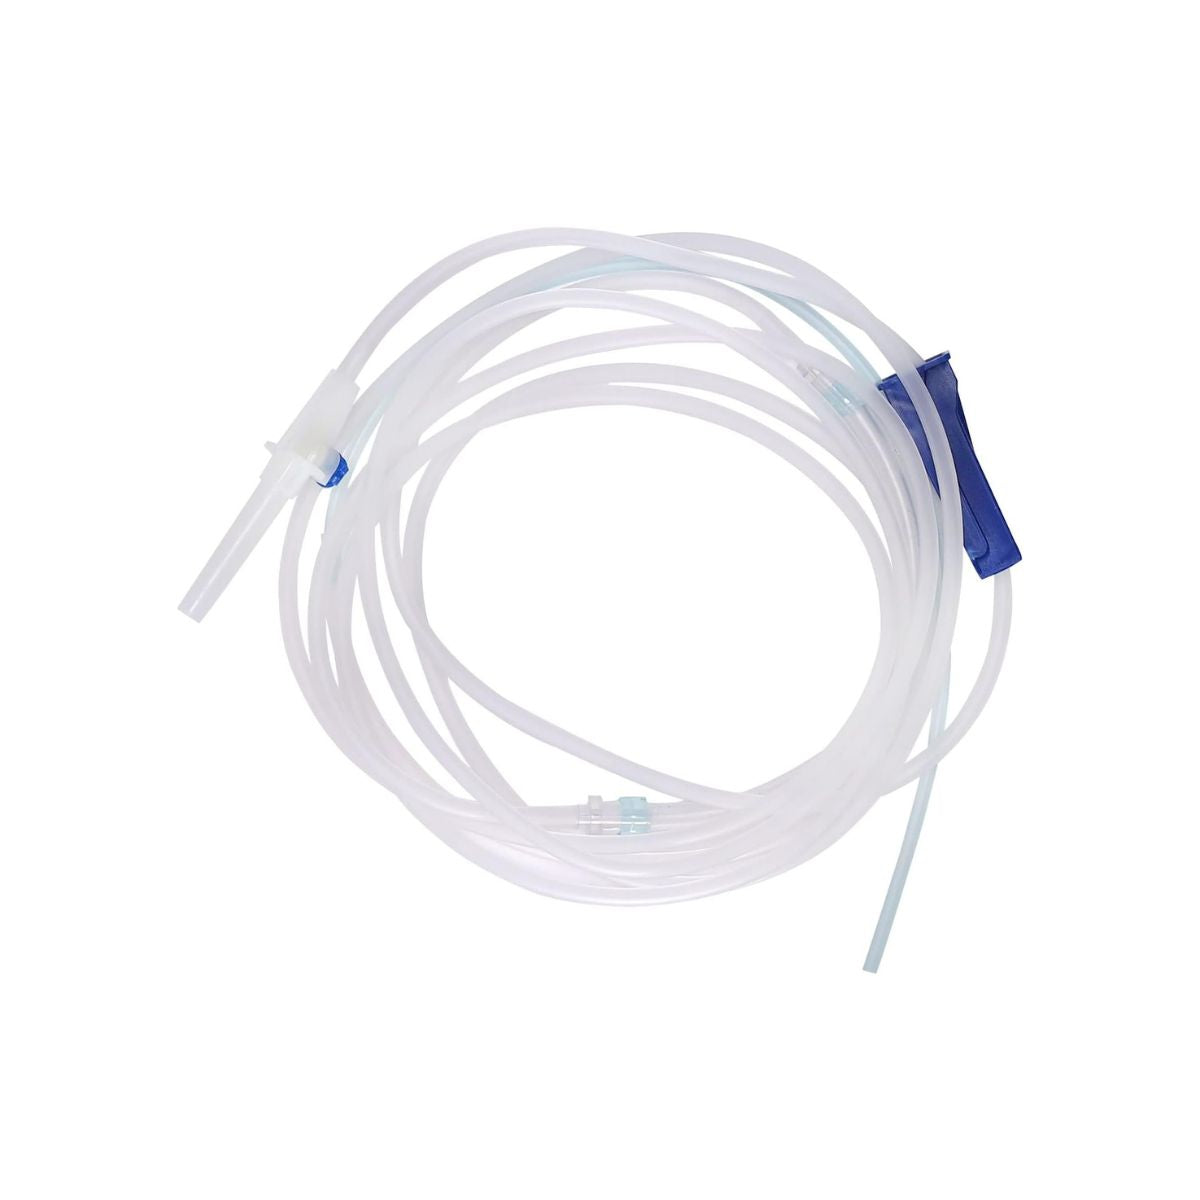 Saline Irrigation Tubing for DTE Woodpecker Implant Motor, Ultrasurgery (Pack of 12) (4714736549987)